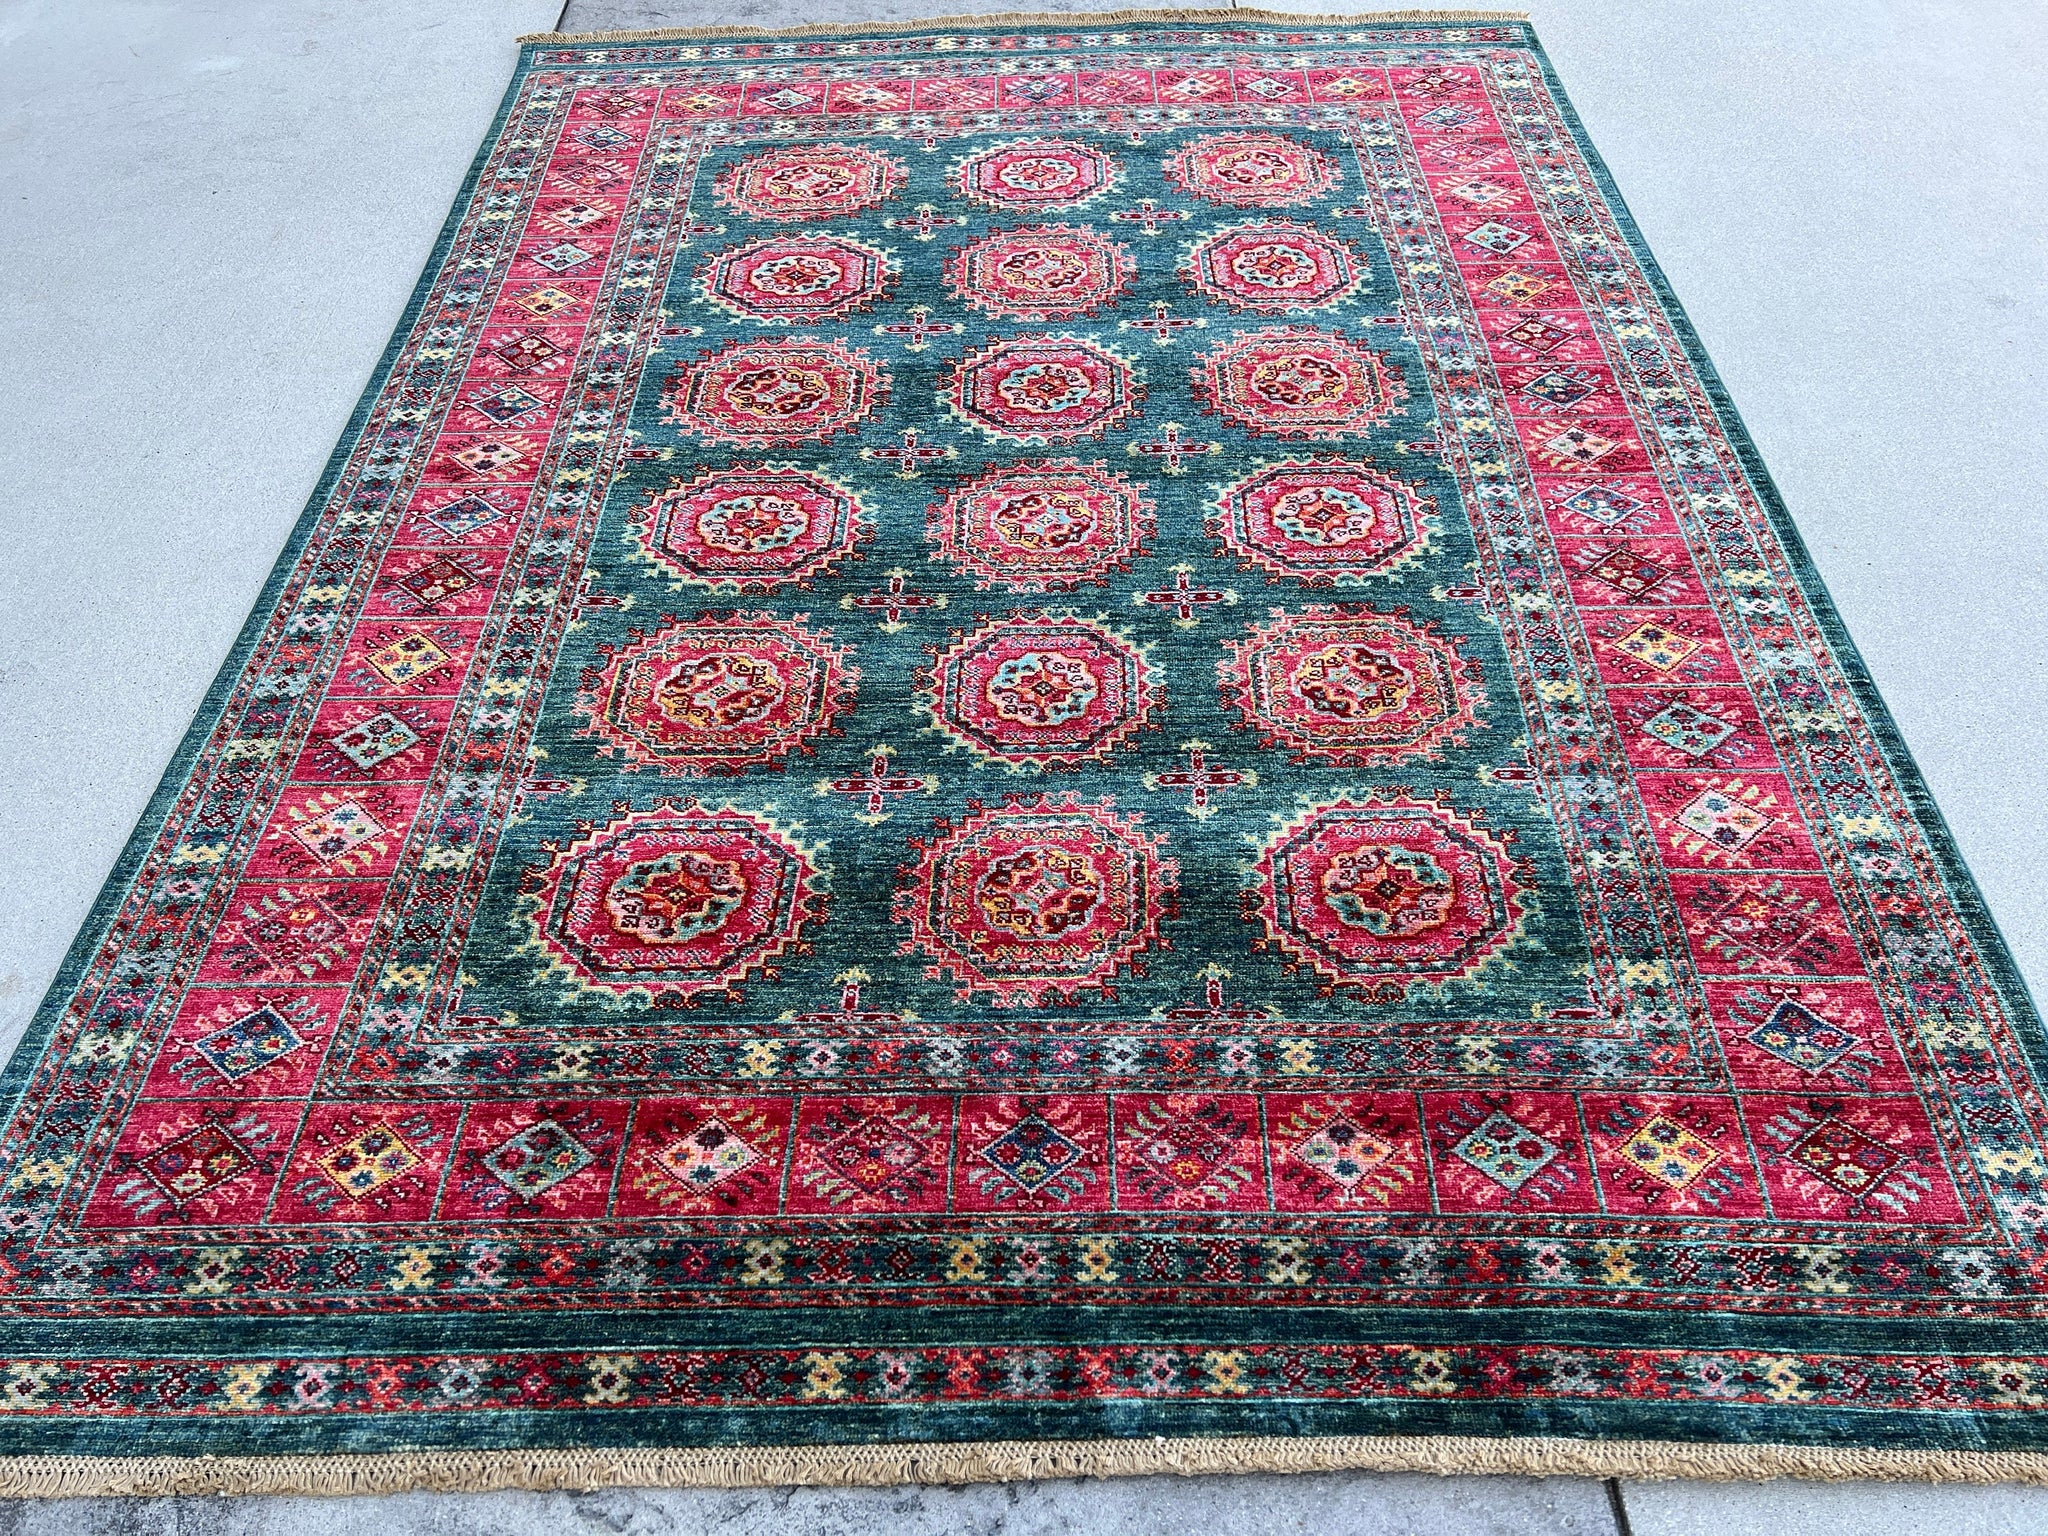 6x8 (180x245) Hand Knotted Handmade Afghan Rug | Dark Turquoise Ruby Red Pine Green Yellow Cream Maroon Yellow Green Pink Blue Orange Gold